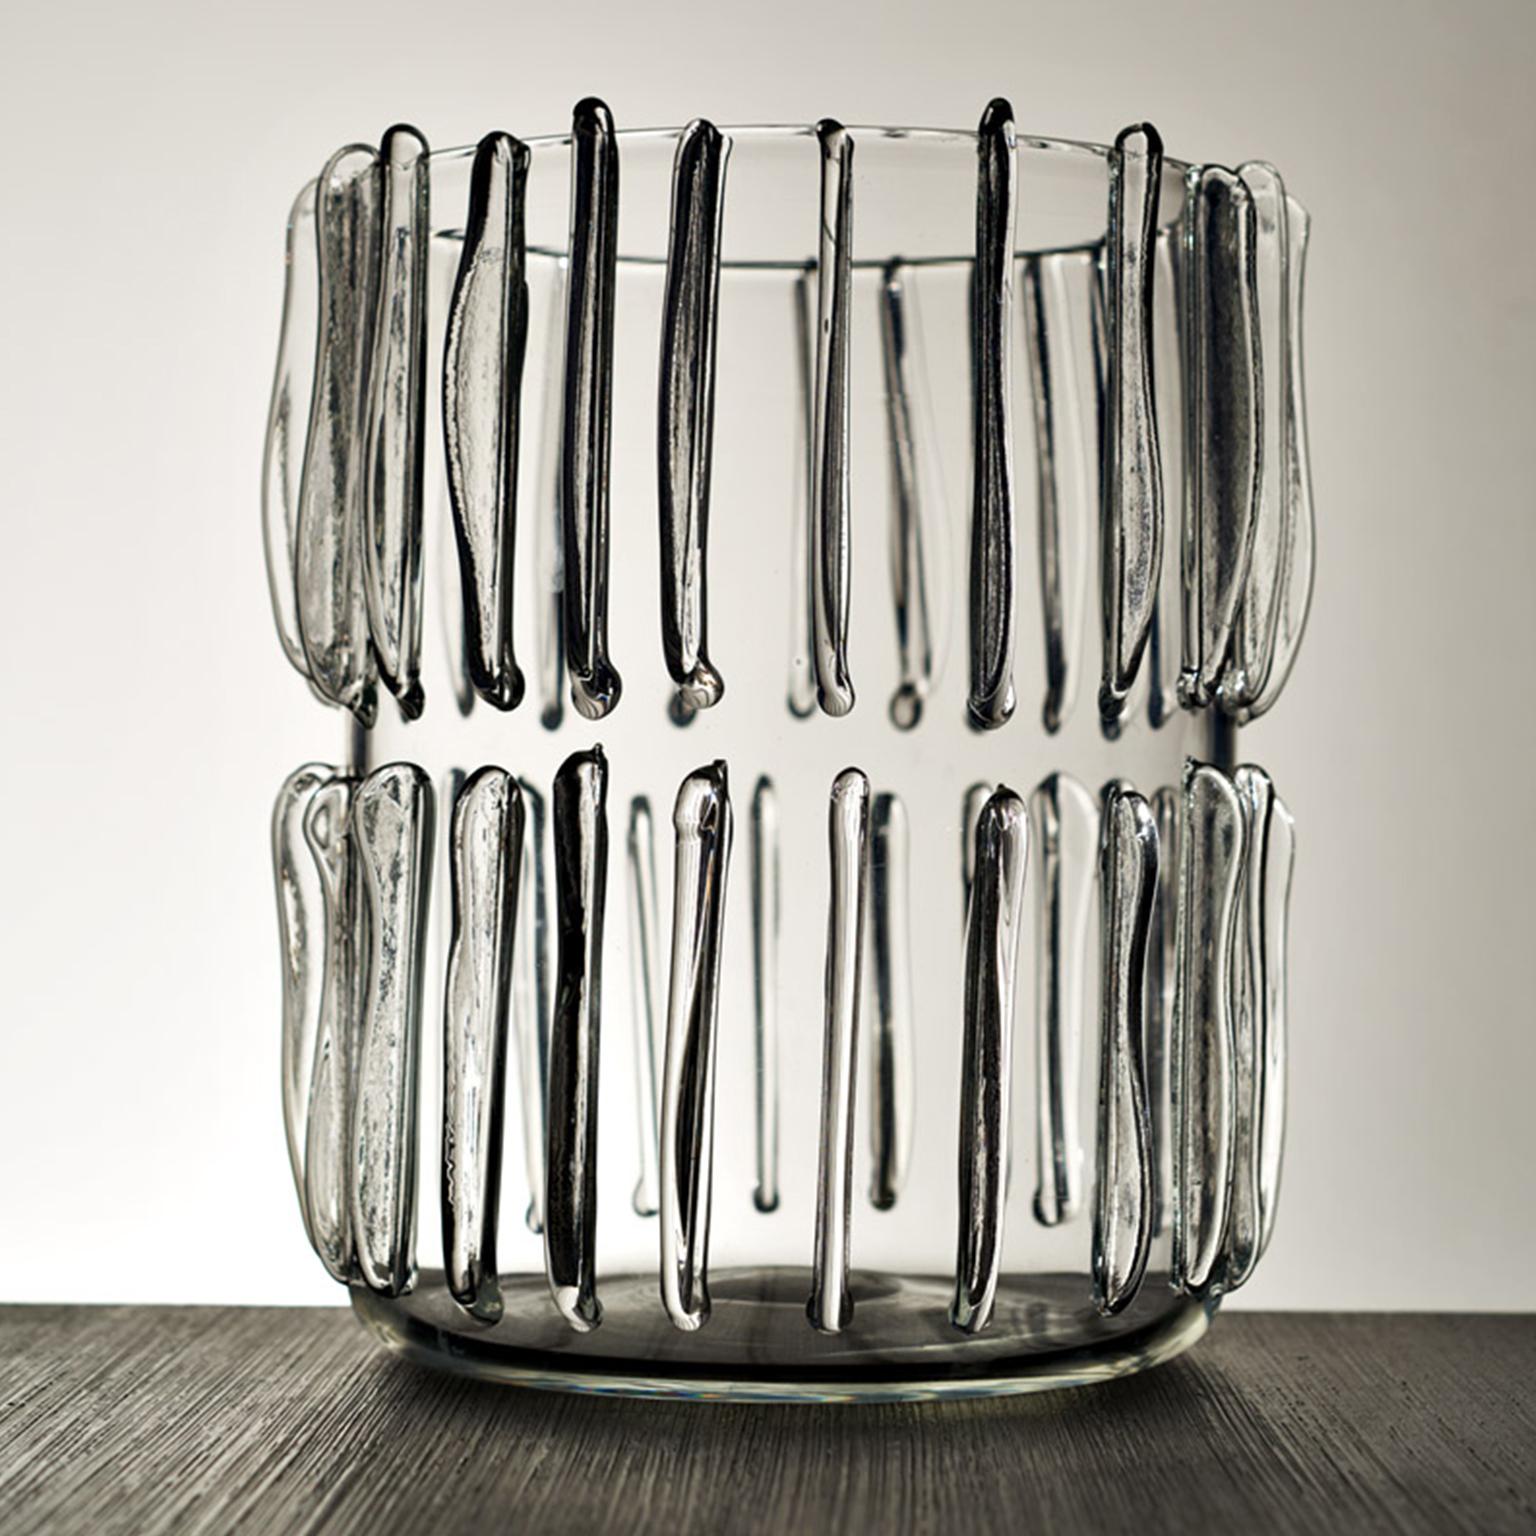 Avallone's sculptural glass vases are unique pieces, individually hand blown by a master-blower in Murano, famed for centuries for its glass production. The artist works firstly on the designs in his Milan studio, before presiding over the blowing